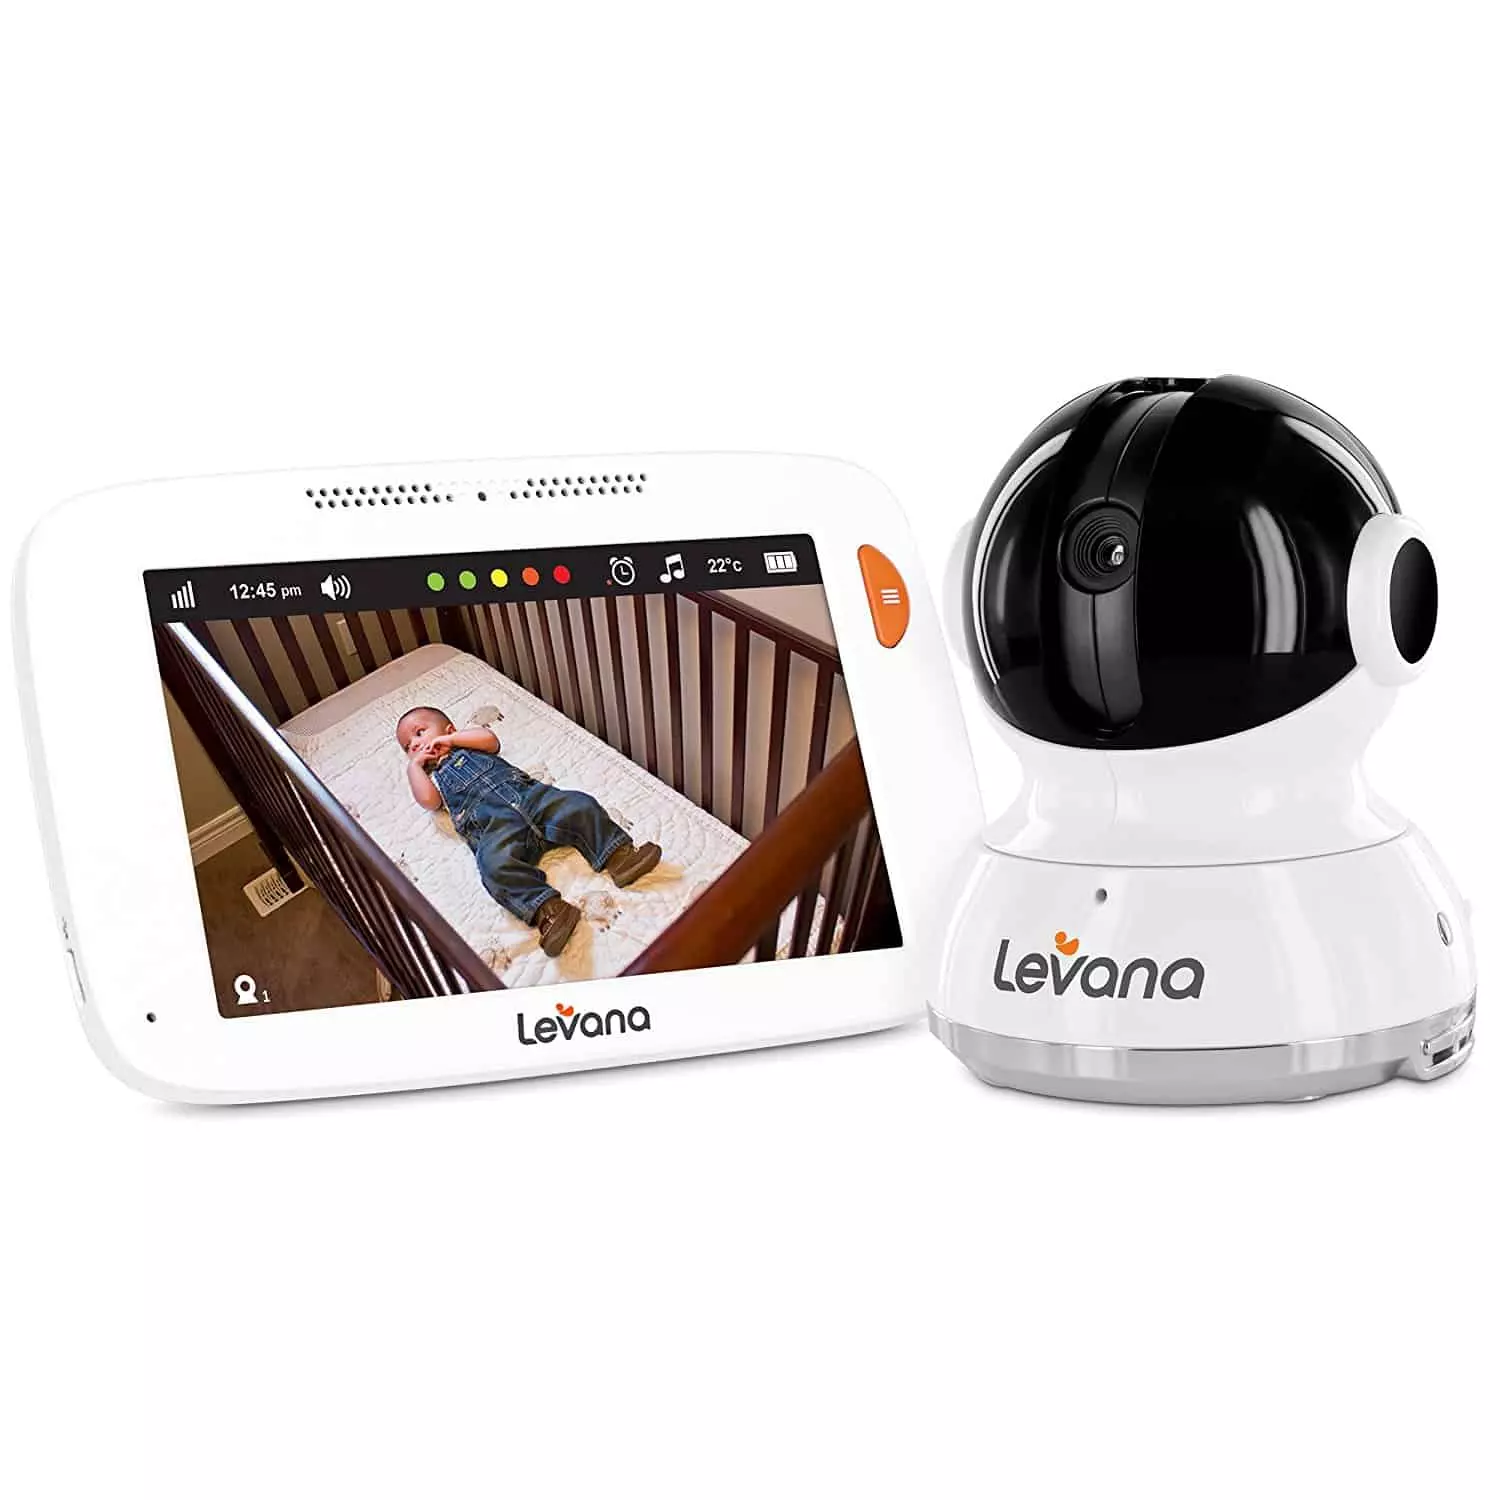 Video Baby Monitor review: Levana 